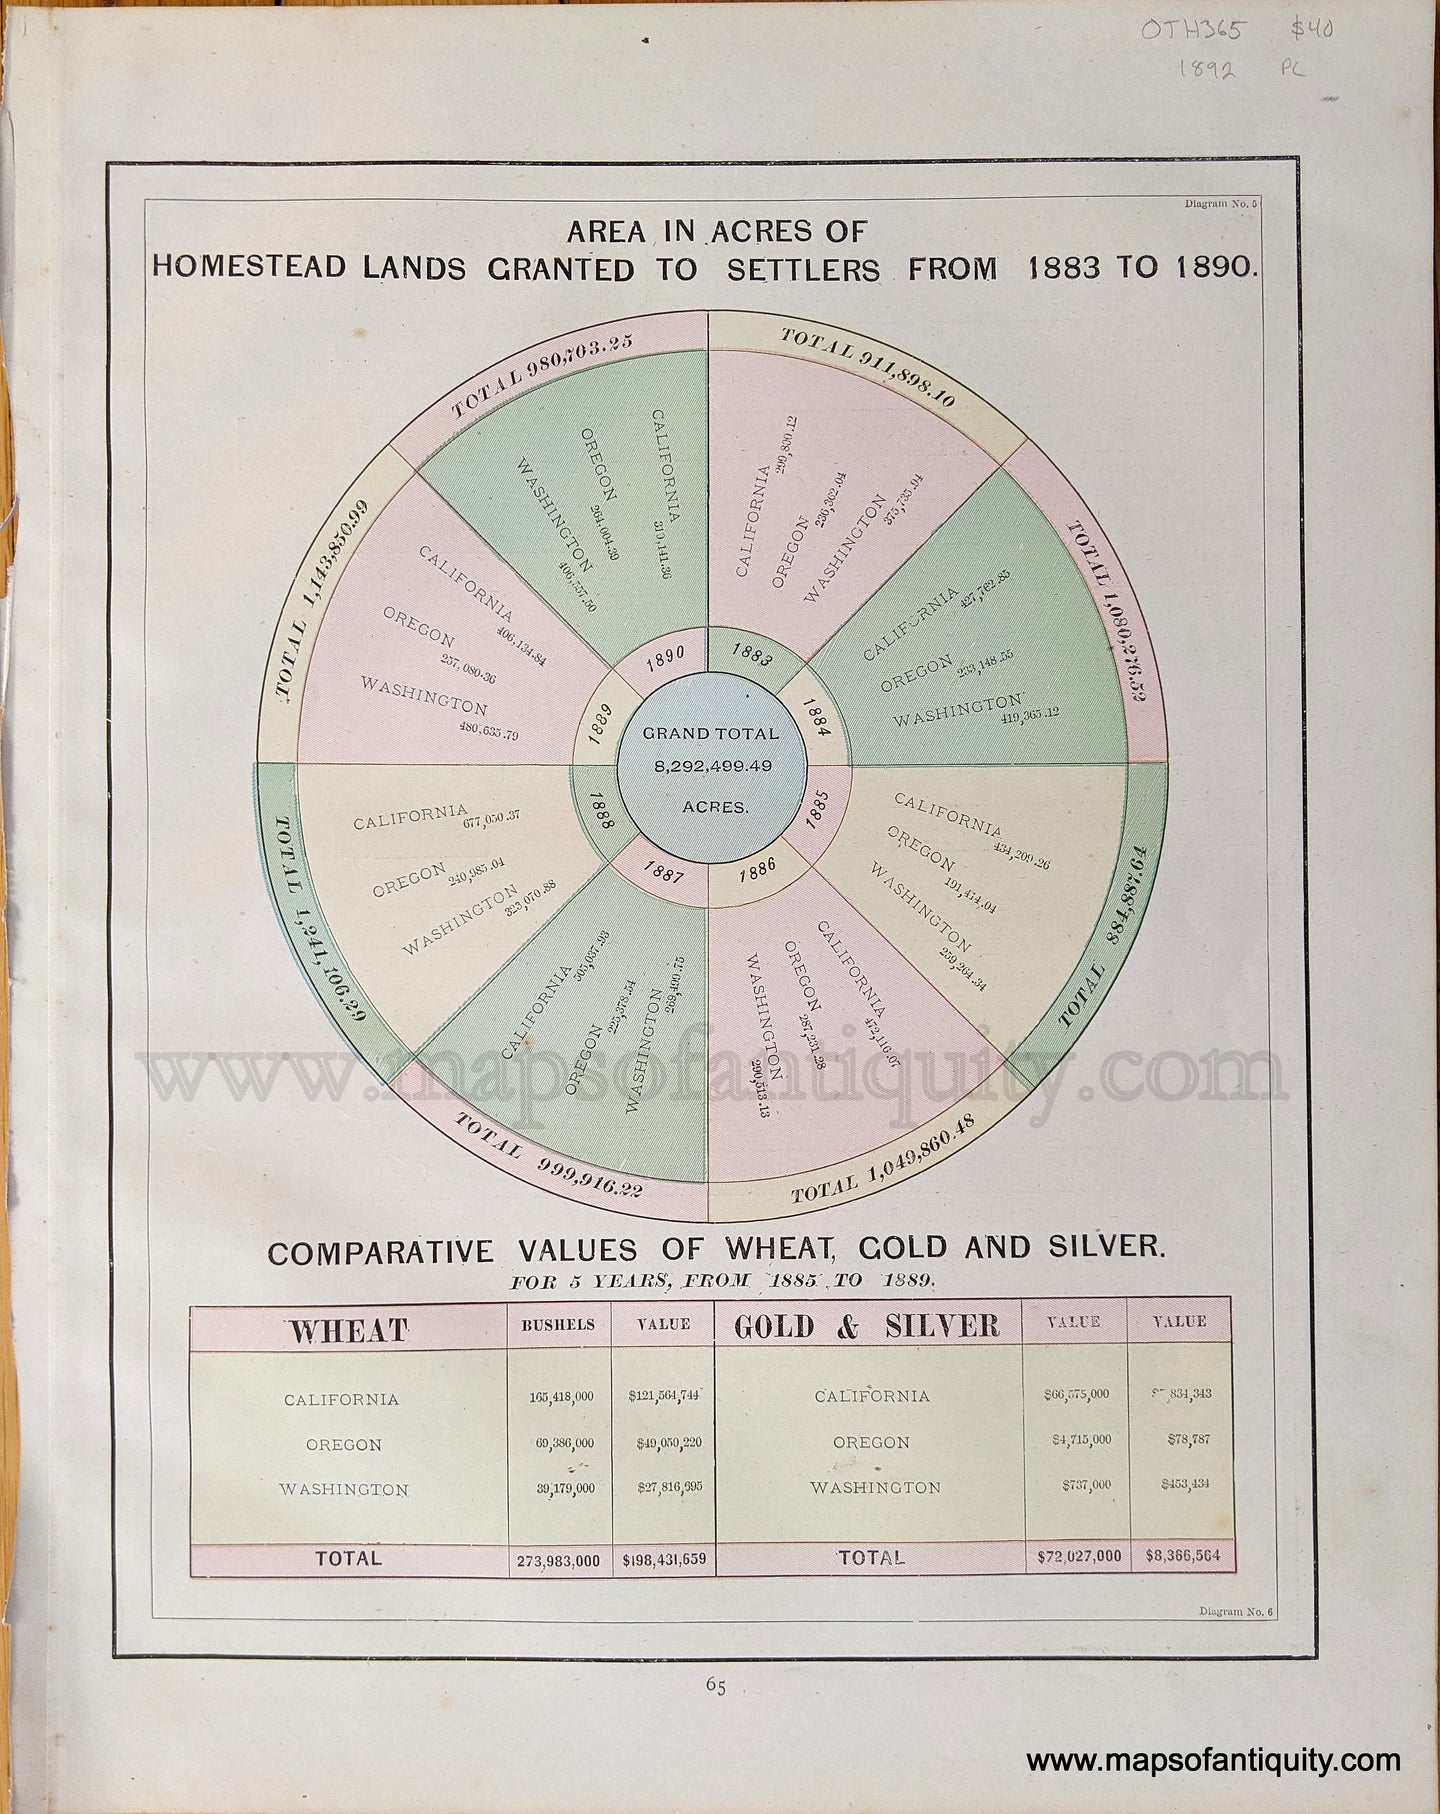 Genuine-Antique-Printed-Color-Comparative-Chart-Area-in-Acres-of-Homestead-Lands-Granted-to-Settlers-from-1883-to-1890-and-Comparative-Values-of-Wheat-Gold-and-Silver;-verso:-Product-and-Value-of-Wheat-Crops-Quantities-and-Values-of-Wheat-and-Wheat-Flour-Exported-from-the-Paicifc-Coast-1886-to-1890-Diagram-Showing-Exports-of-Breadstuffs-Comparative--1892-Home-Library-&-Supply-Association-Maps-Of-Antiquity-1800s-19th-century